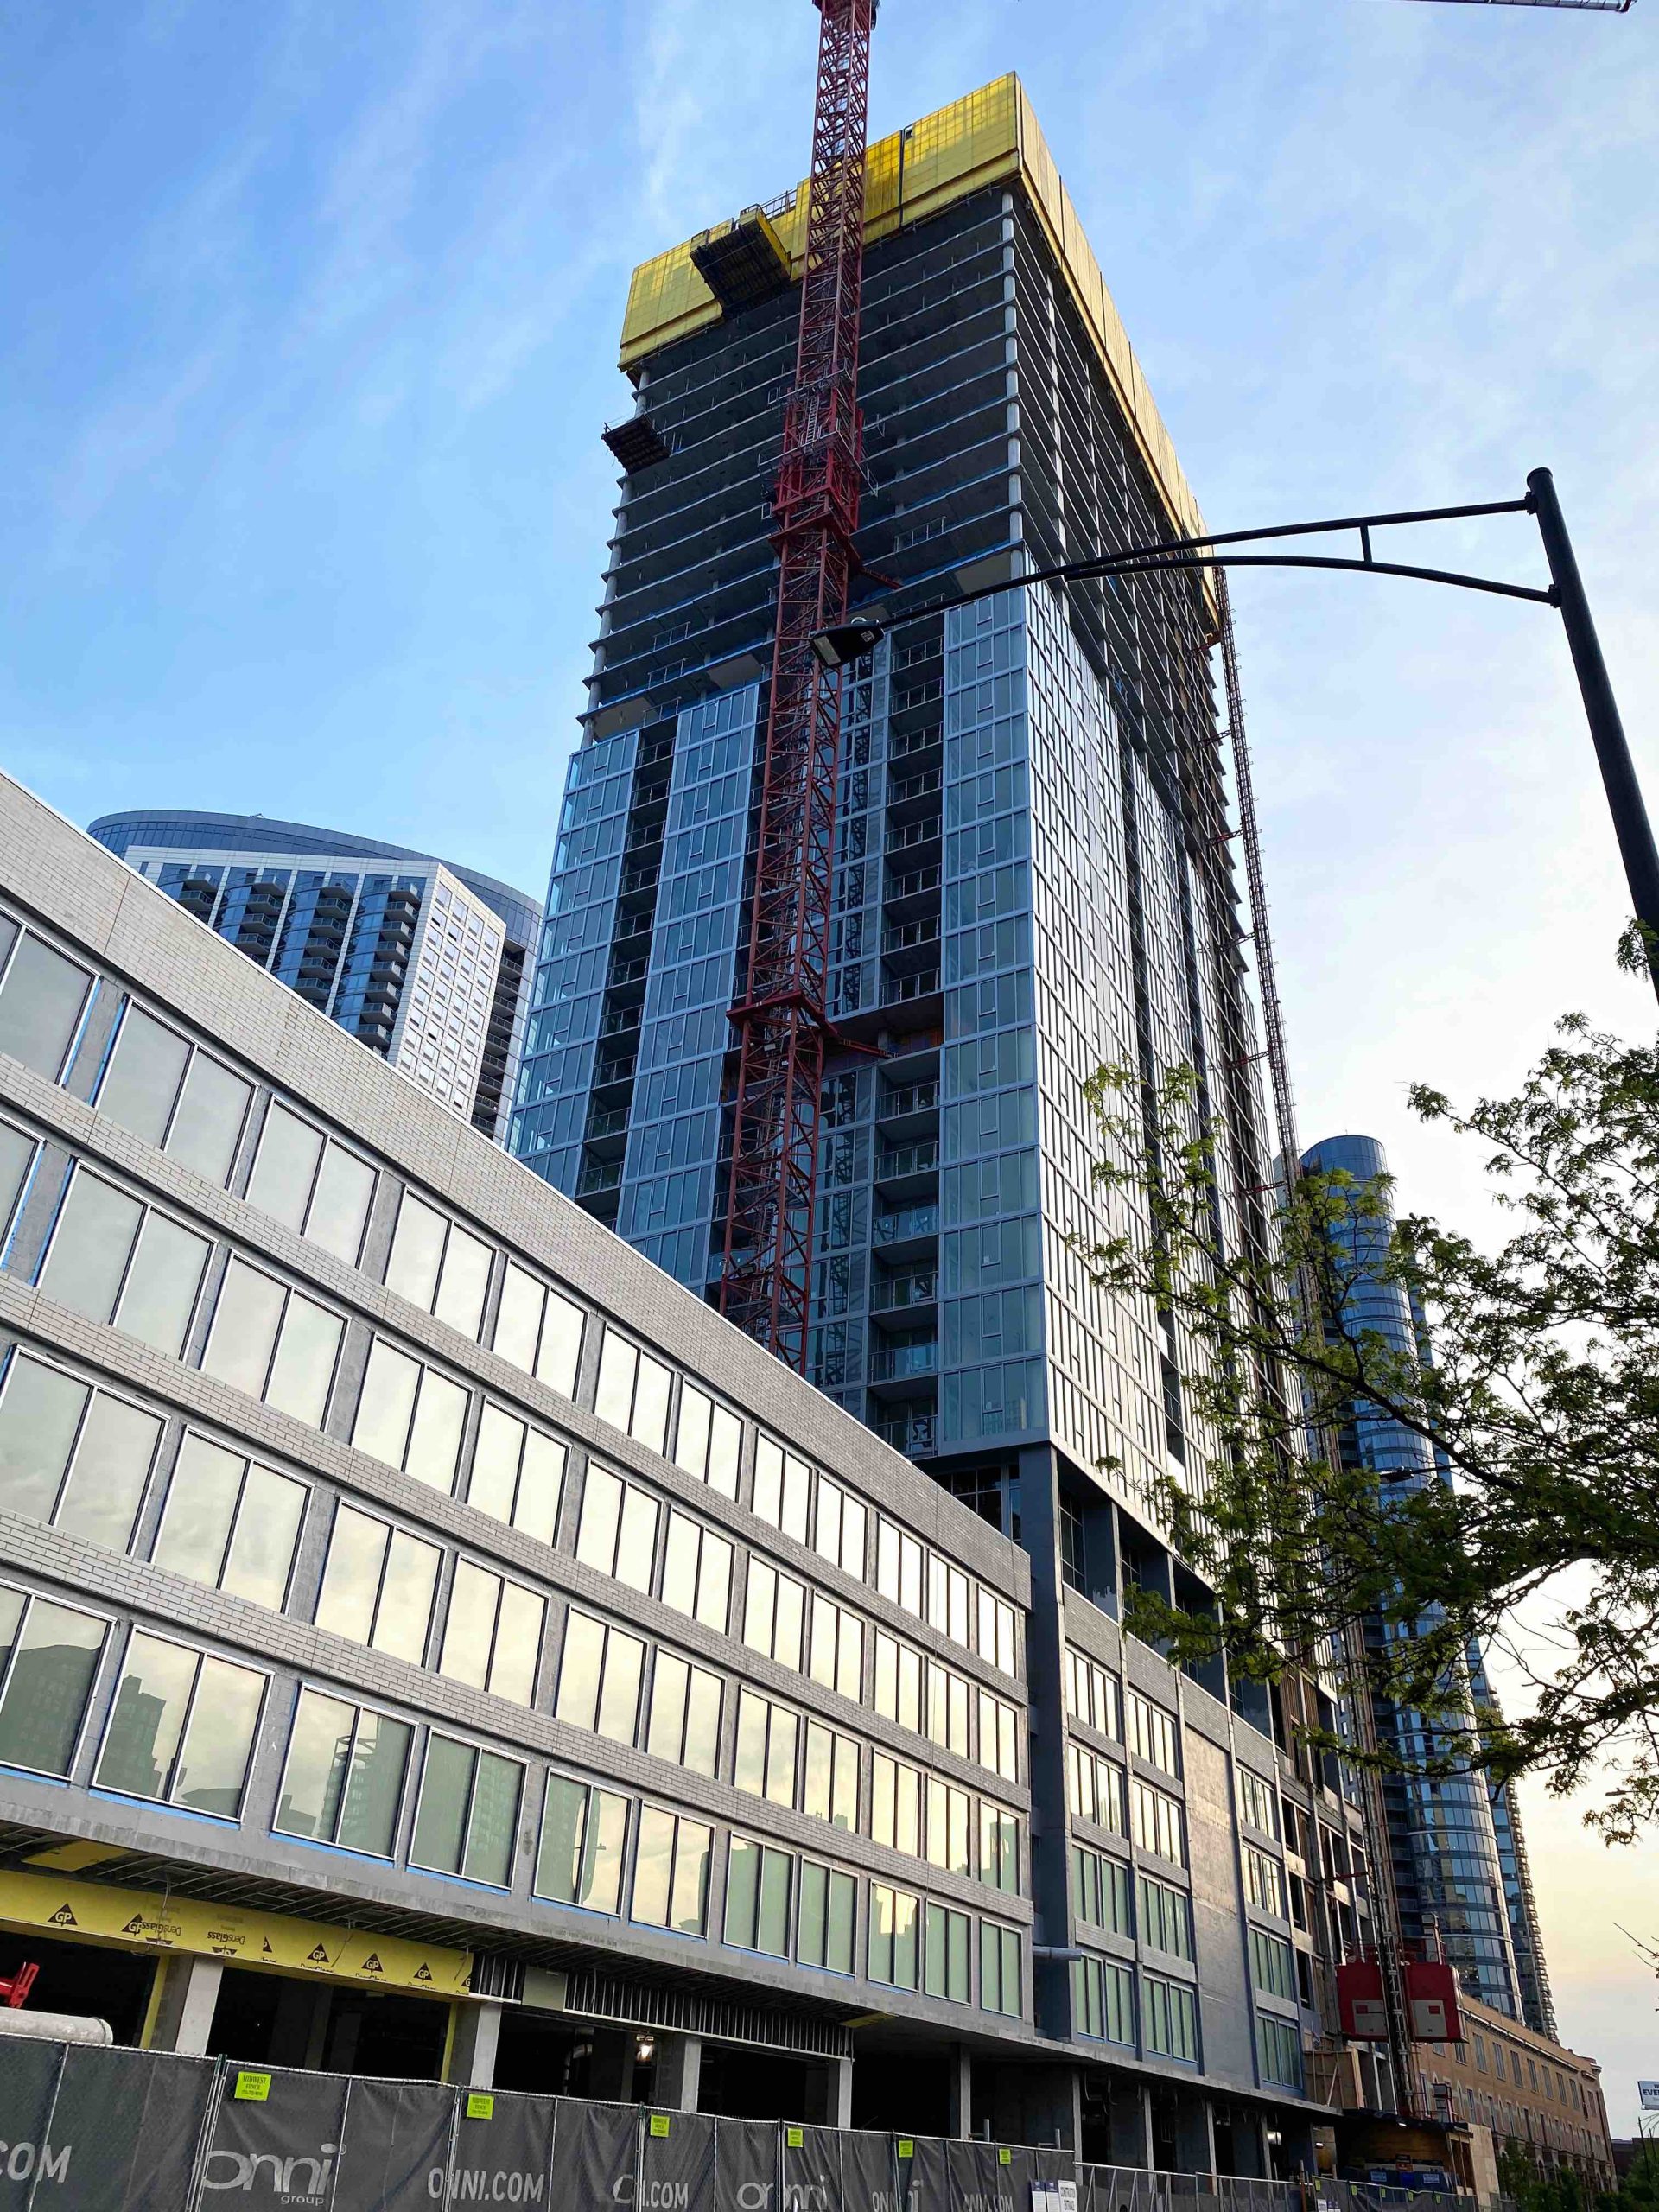 A view of the construction at the new The Grand luxury apartment building in Chicago'd River North 